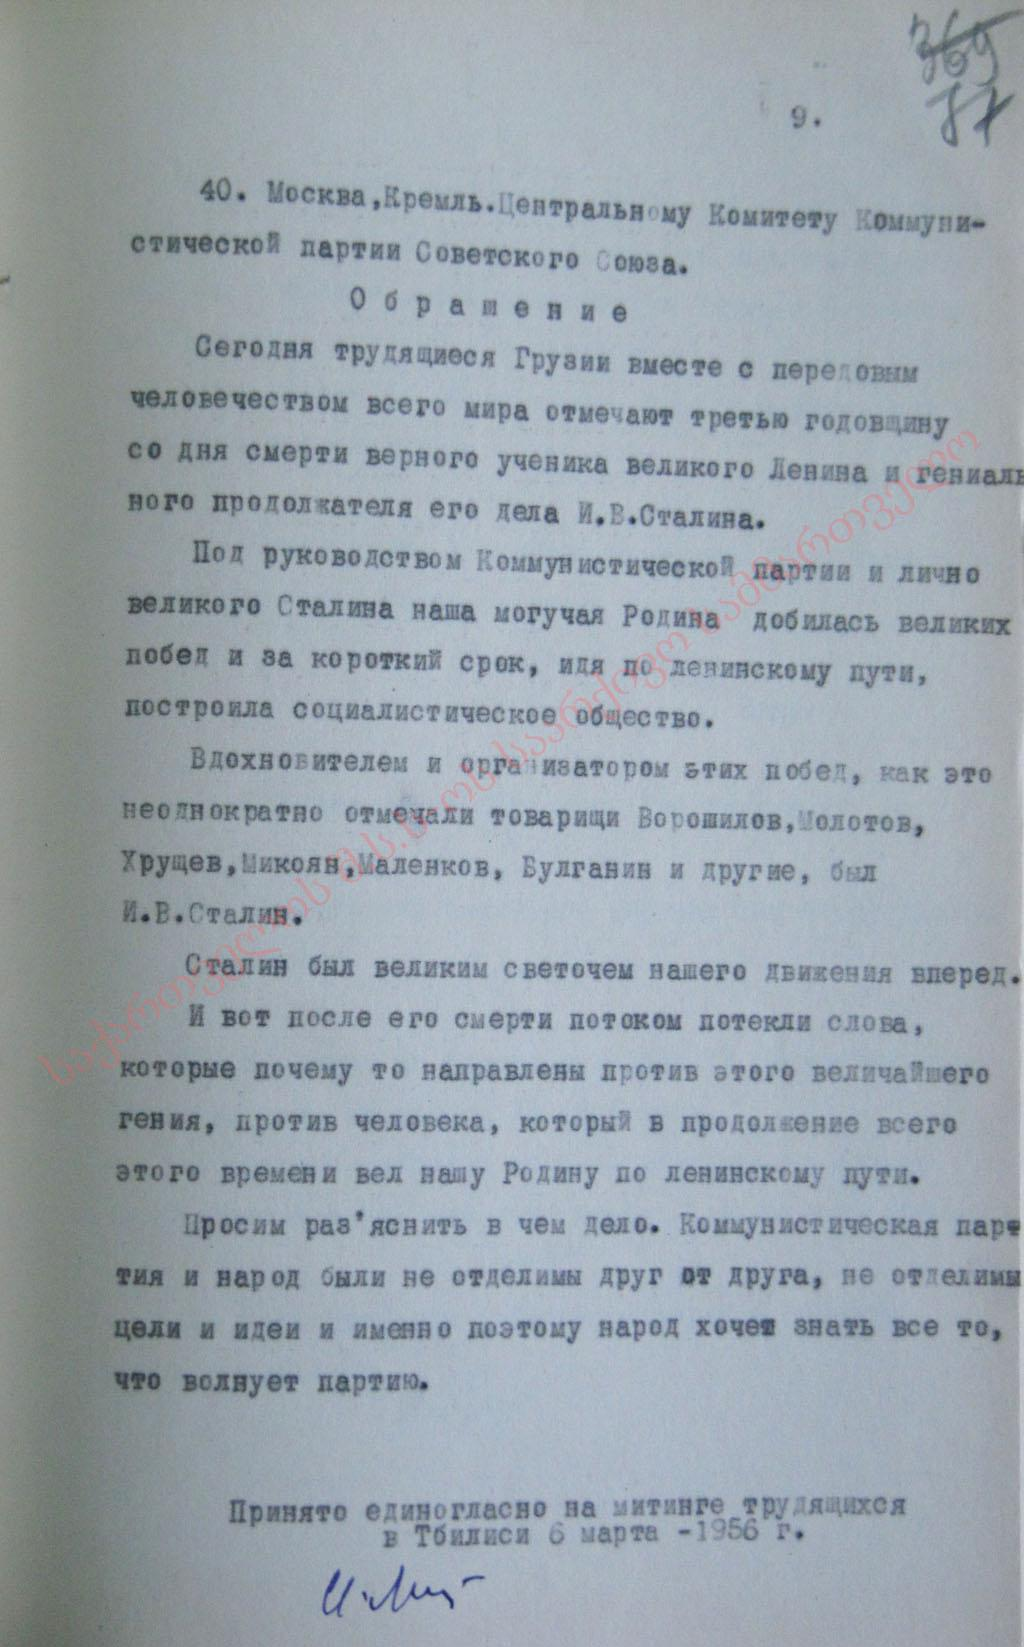 Appeals of the activists of the manifestation on March 6th,1956 